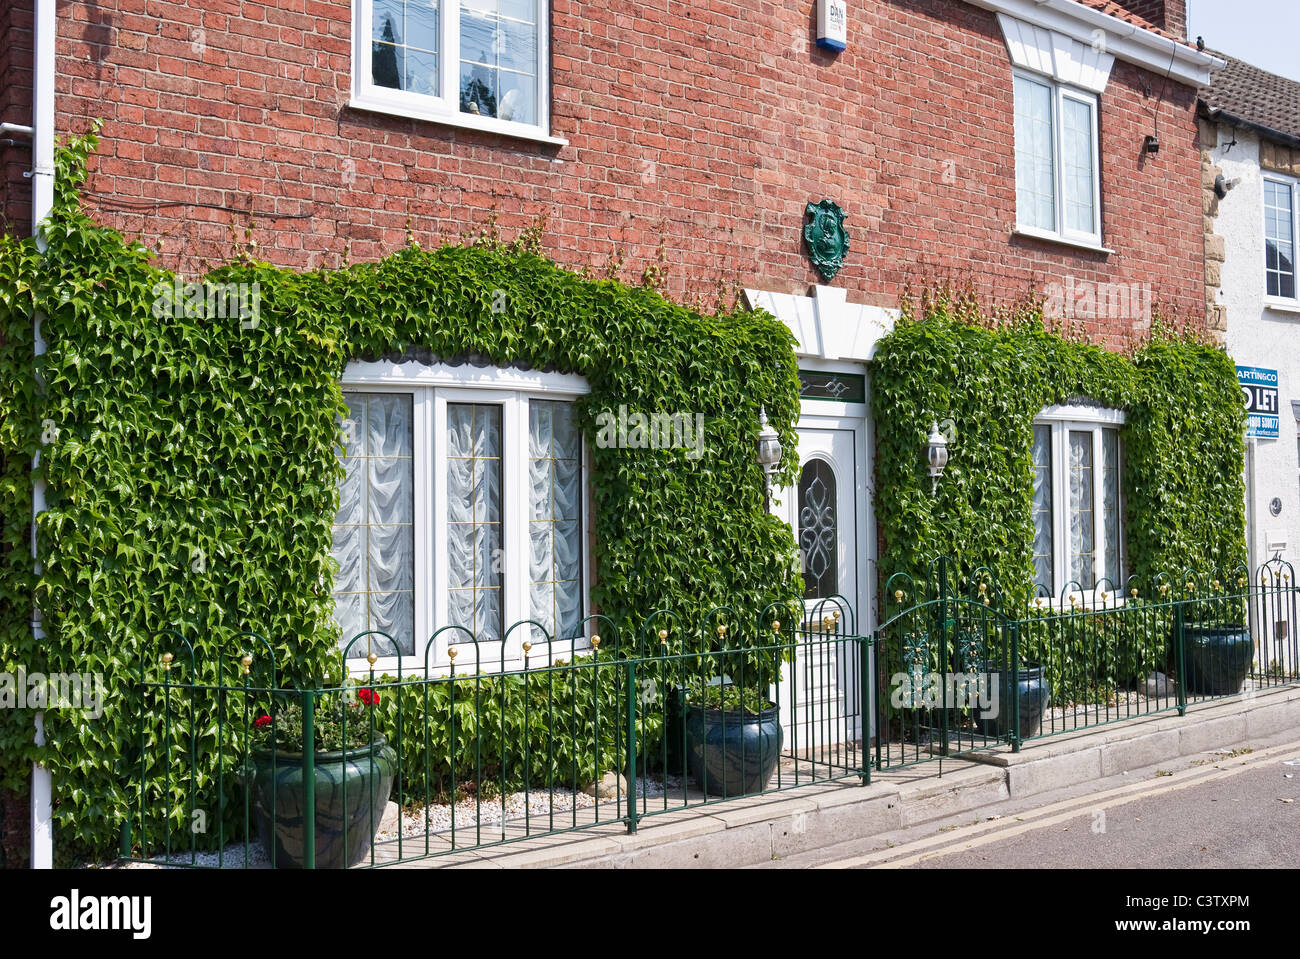 Creeper adorning the outside brick walls of a house in Worksop Notts UK Stock Photo